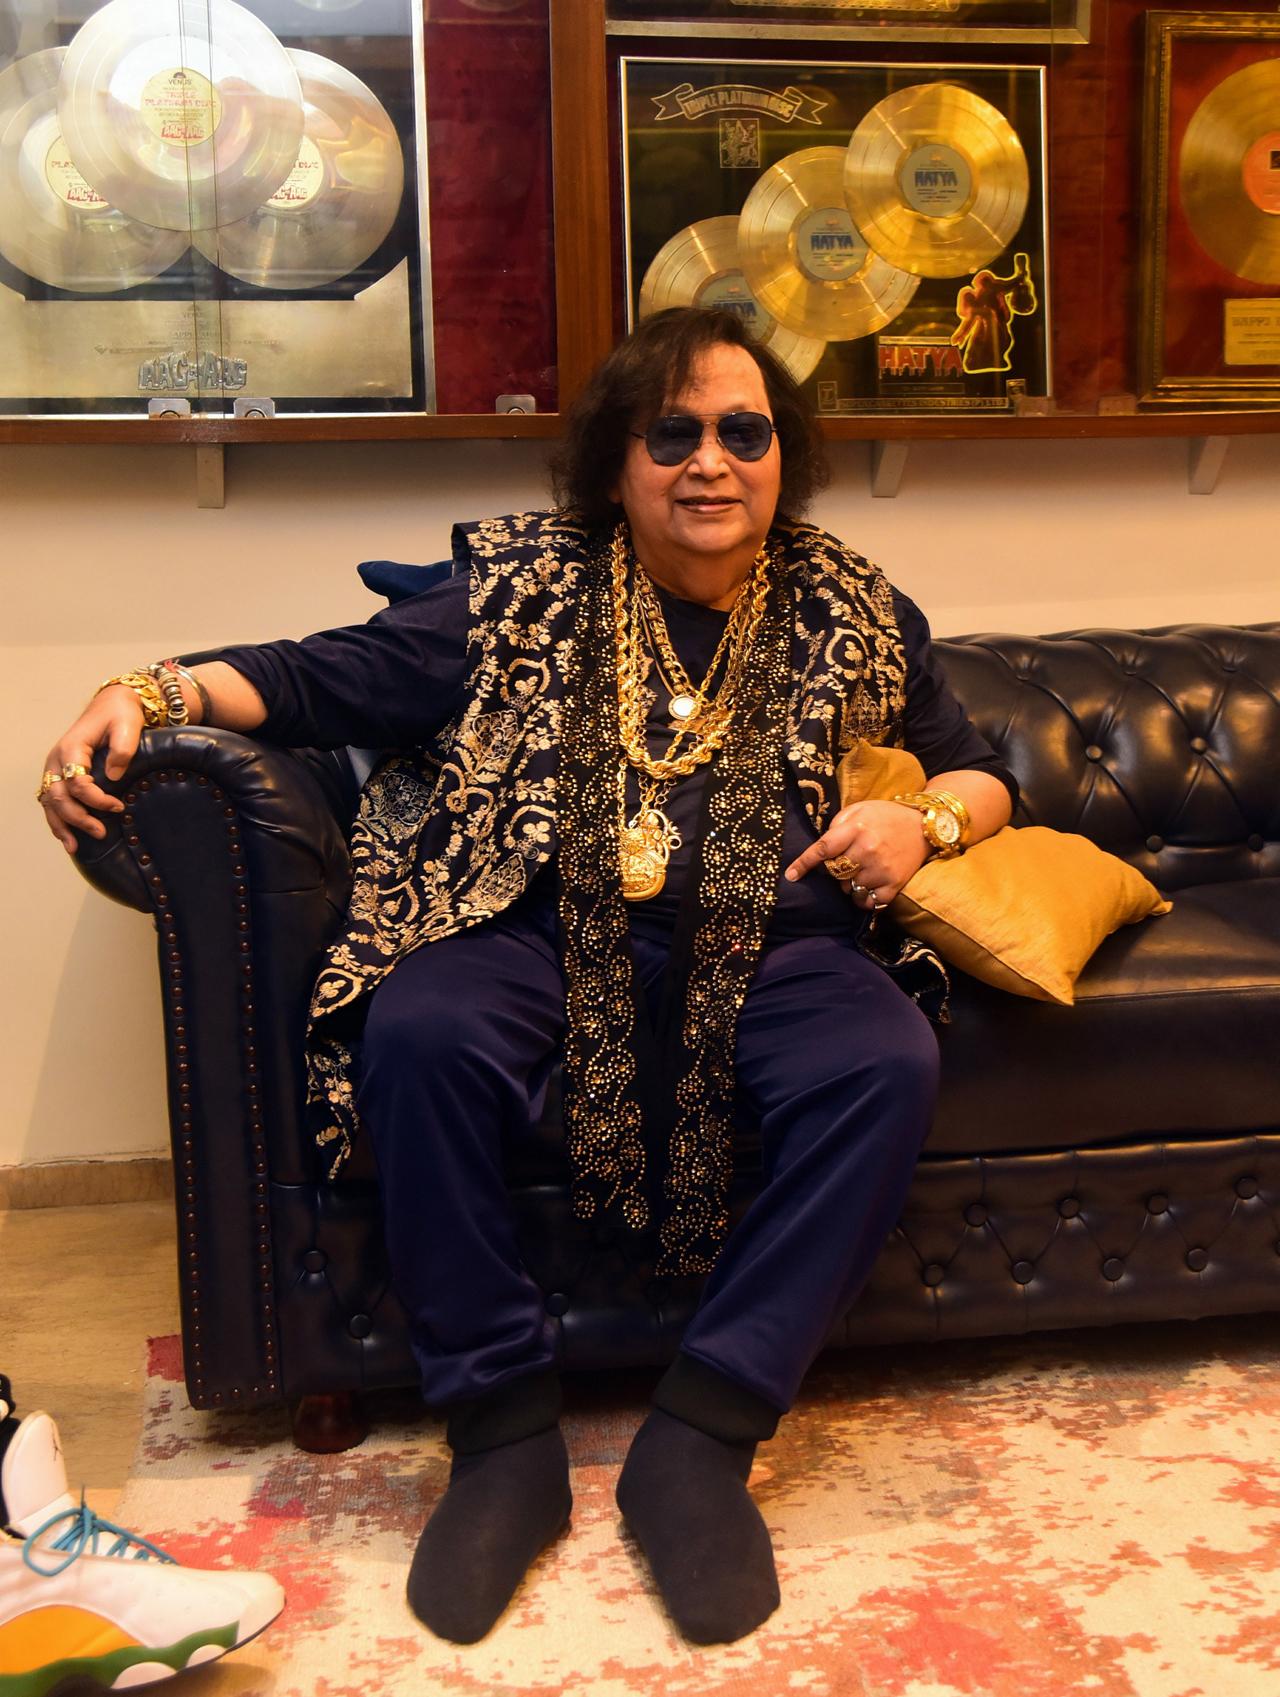 During his career, Bappi Lahiri directed top legends like Mohammed Rafi, Lata Mangeshkar, his 'Mama' Kishore Kumar, Asha Bhosale, Usha Uthup and many more to create waves with soulful, vibrant and rhythmic music. Lahiri created musical marvels with his compositions in 'Chalte, Chalte' (1976), 'Suraksha' with the pacy 'Gunmaster G9' becoming as popular as 007, and 